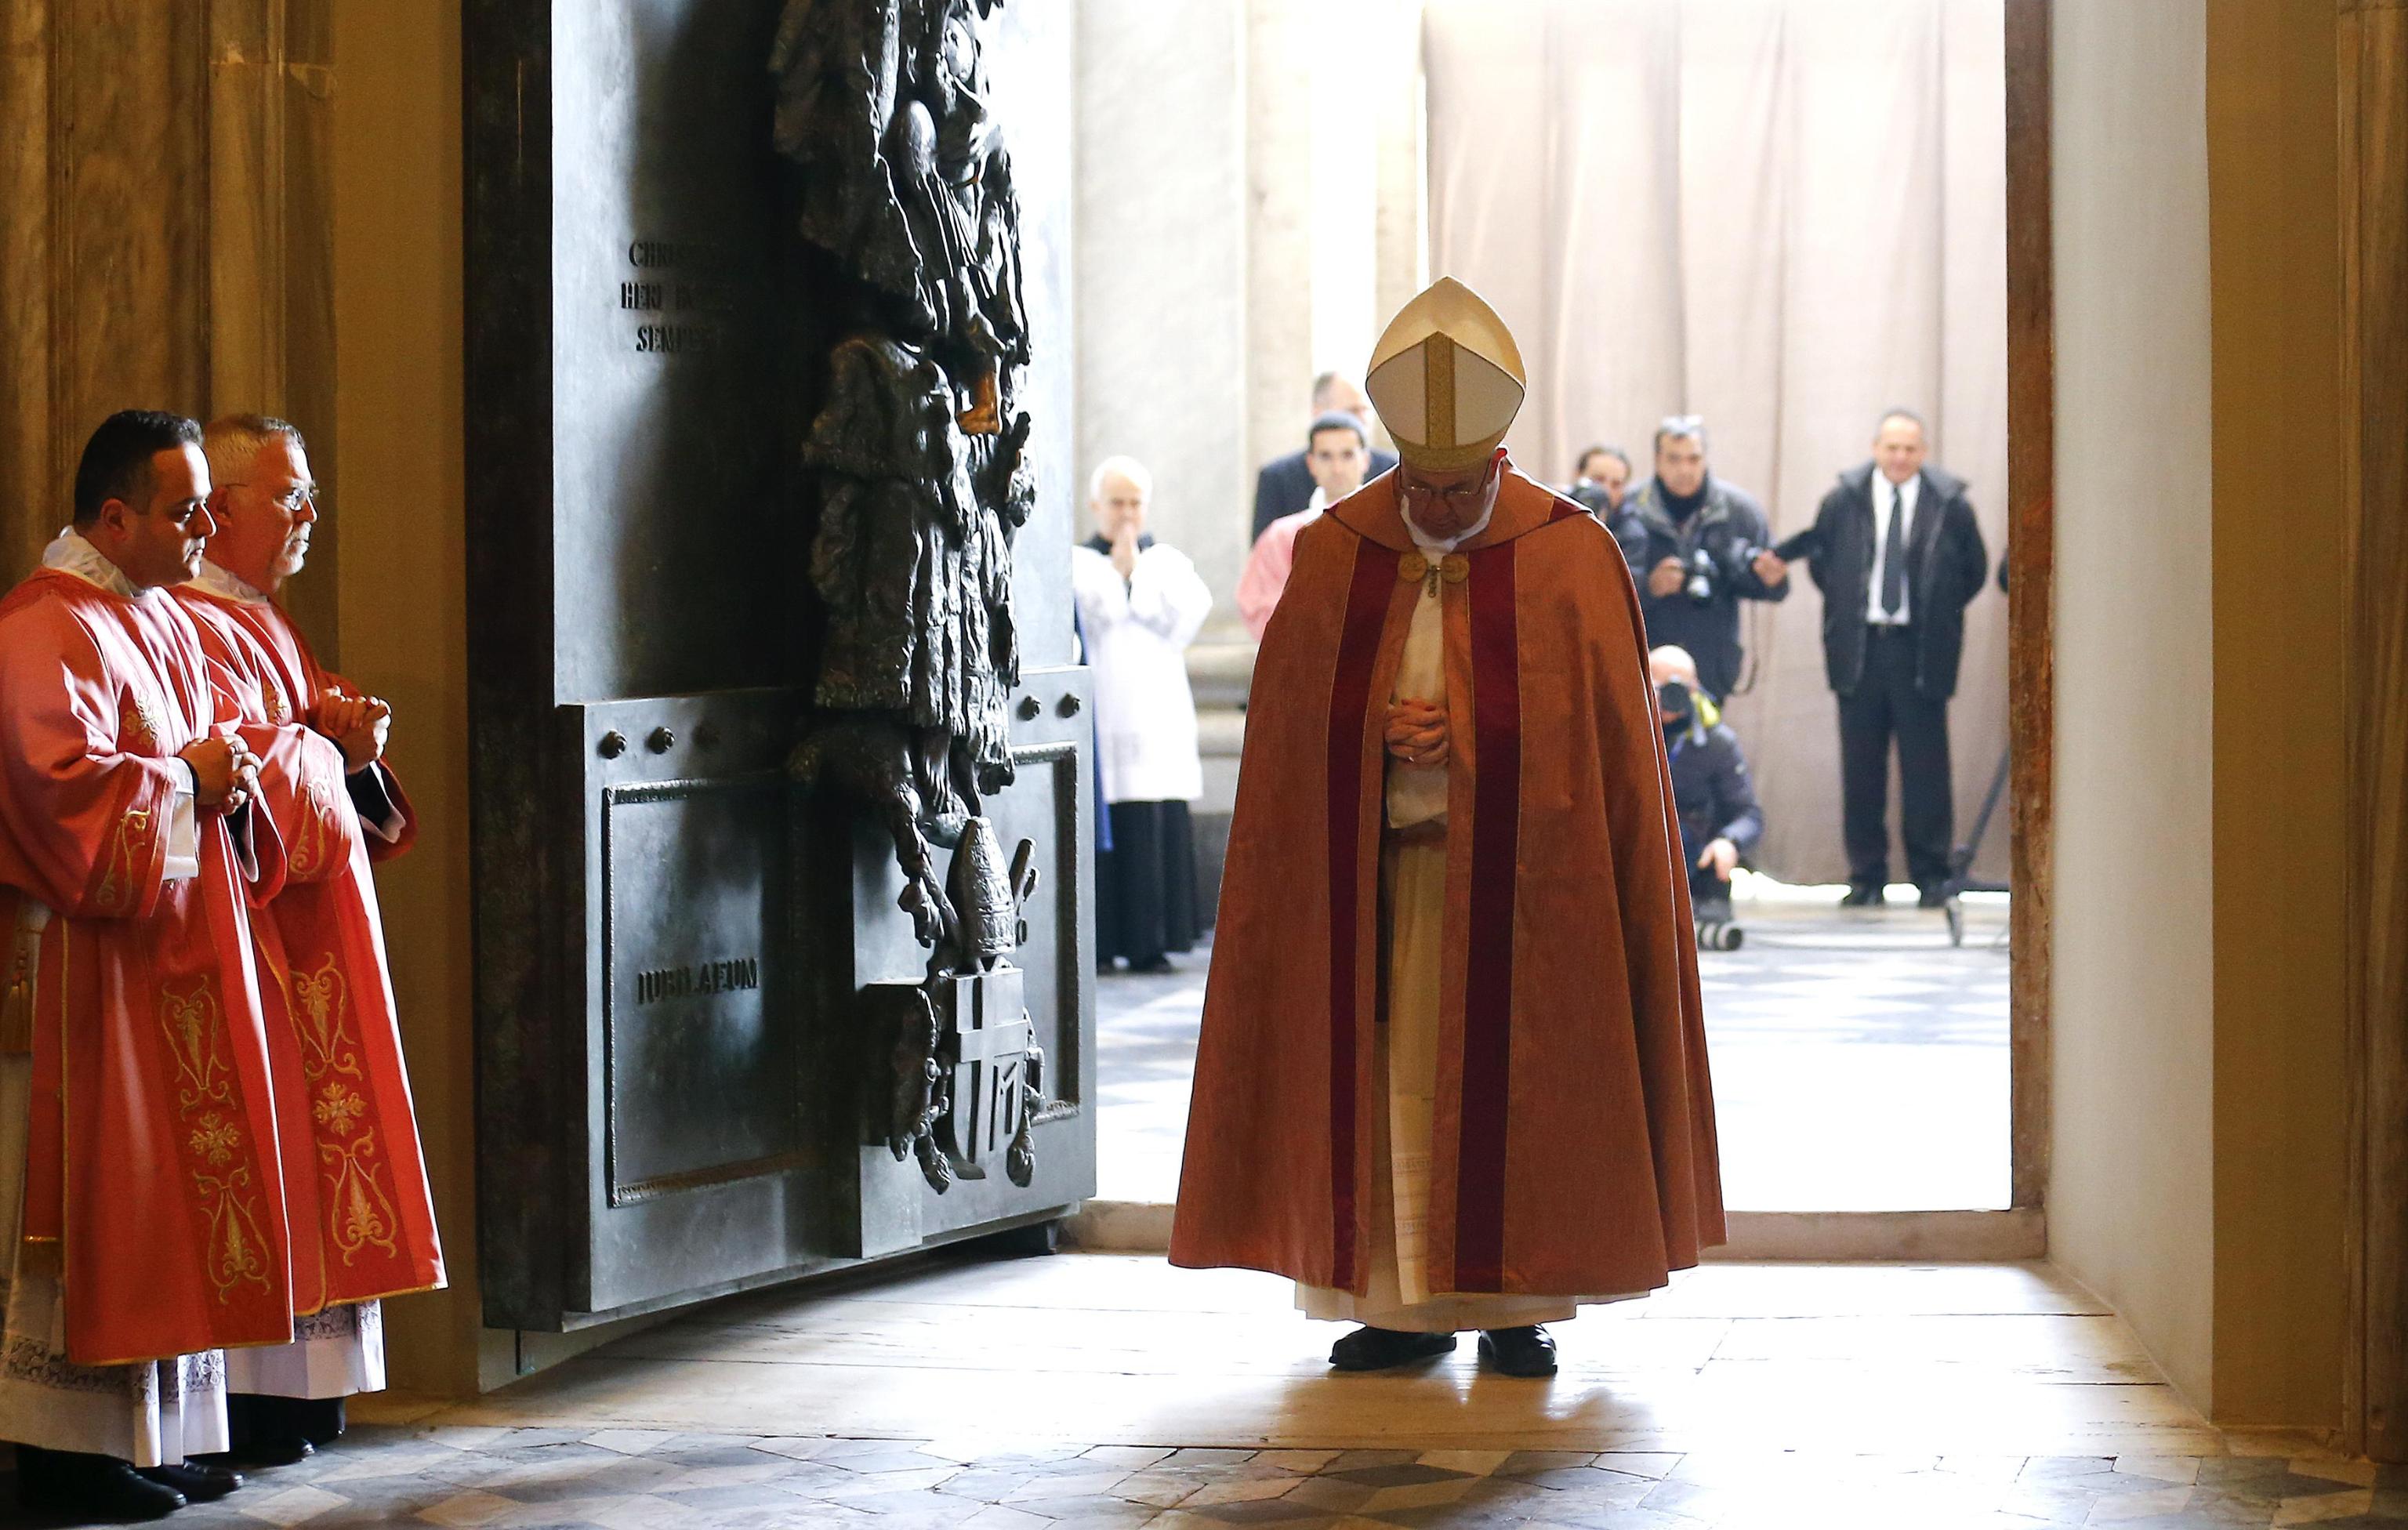 Pope Francis pauses and prays at the front of the Holy Door of the St John Lateran Basilica